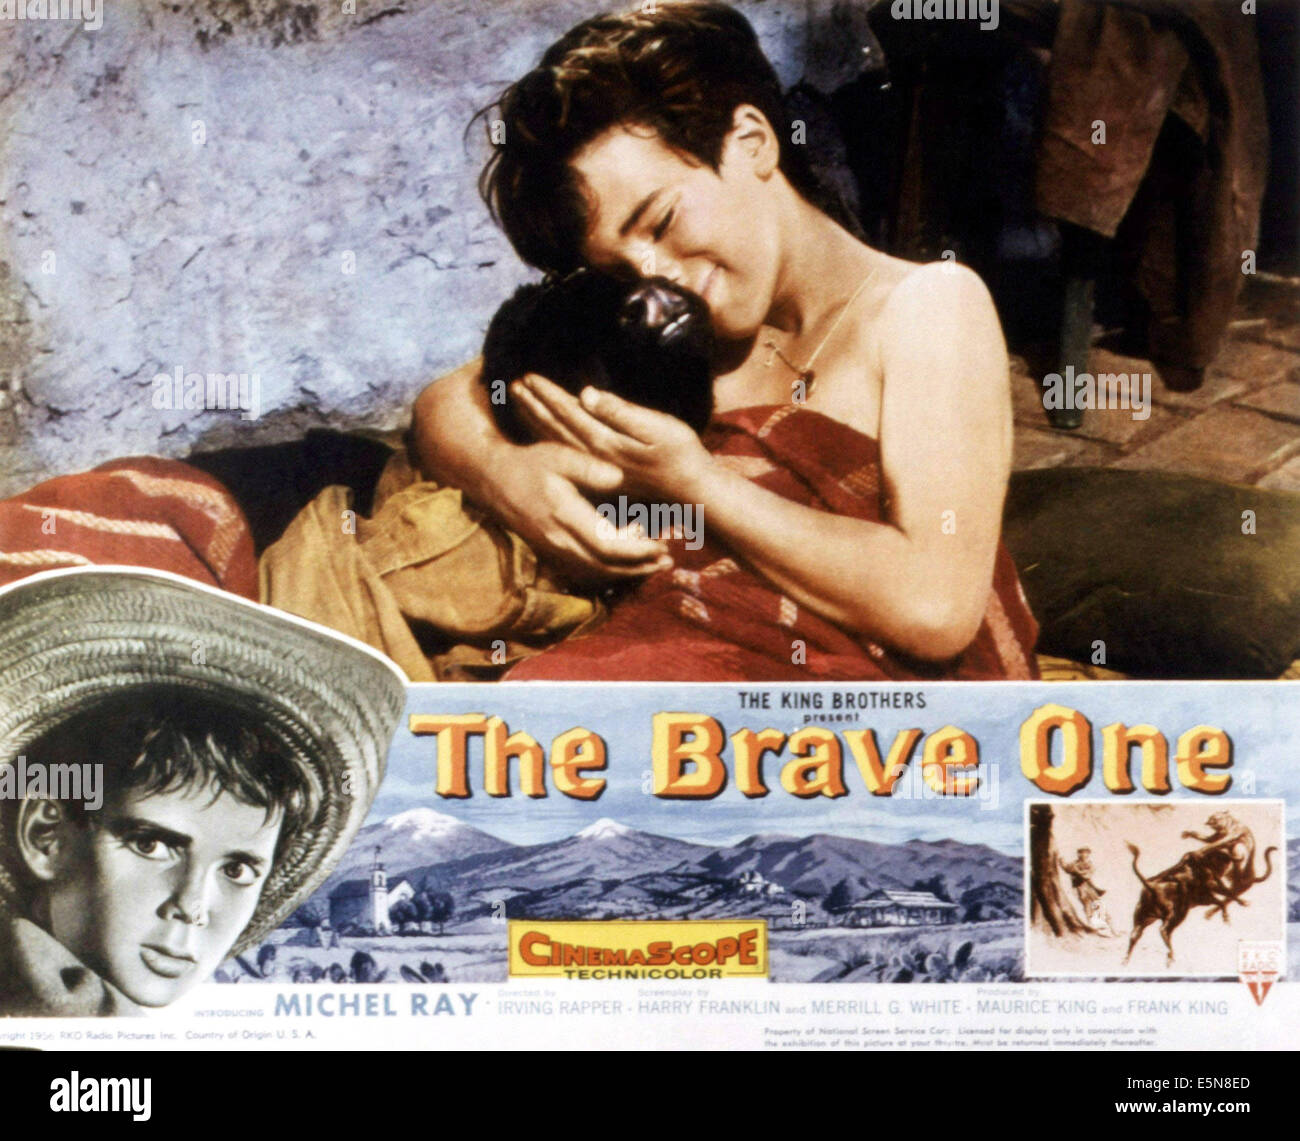 THE BRAVE ONE, Michel Ray, 1957 Stock Photo - Alamy